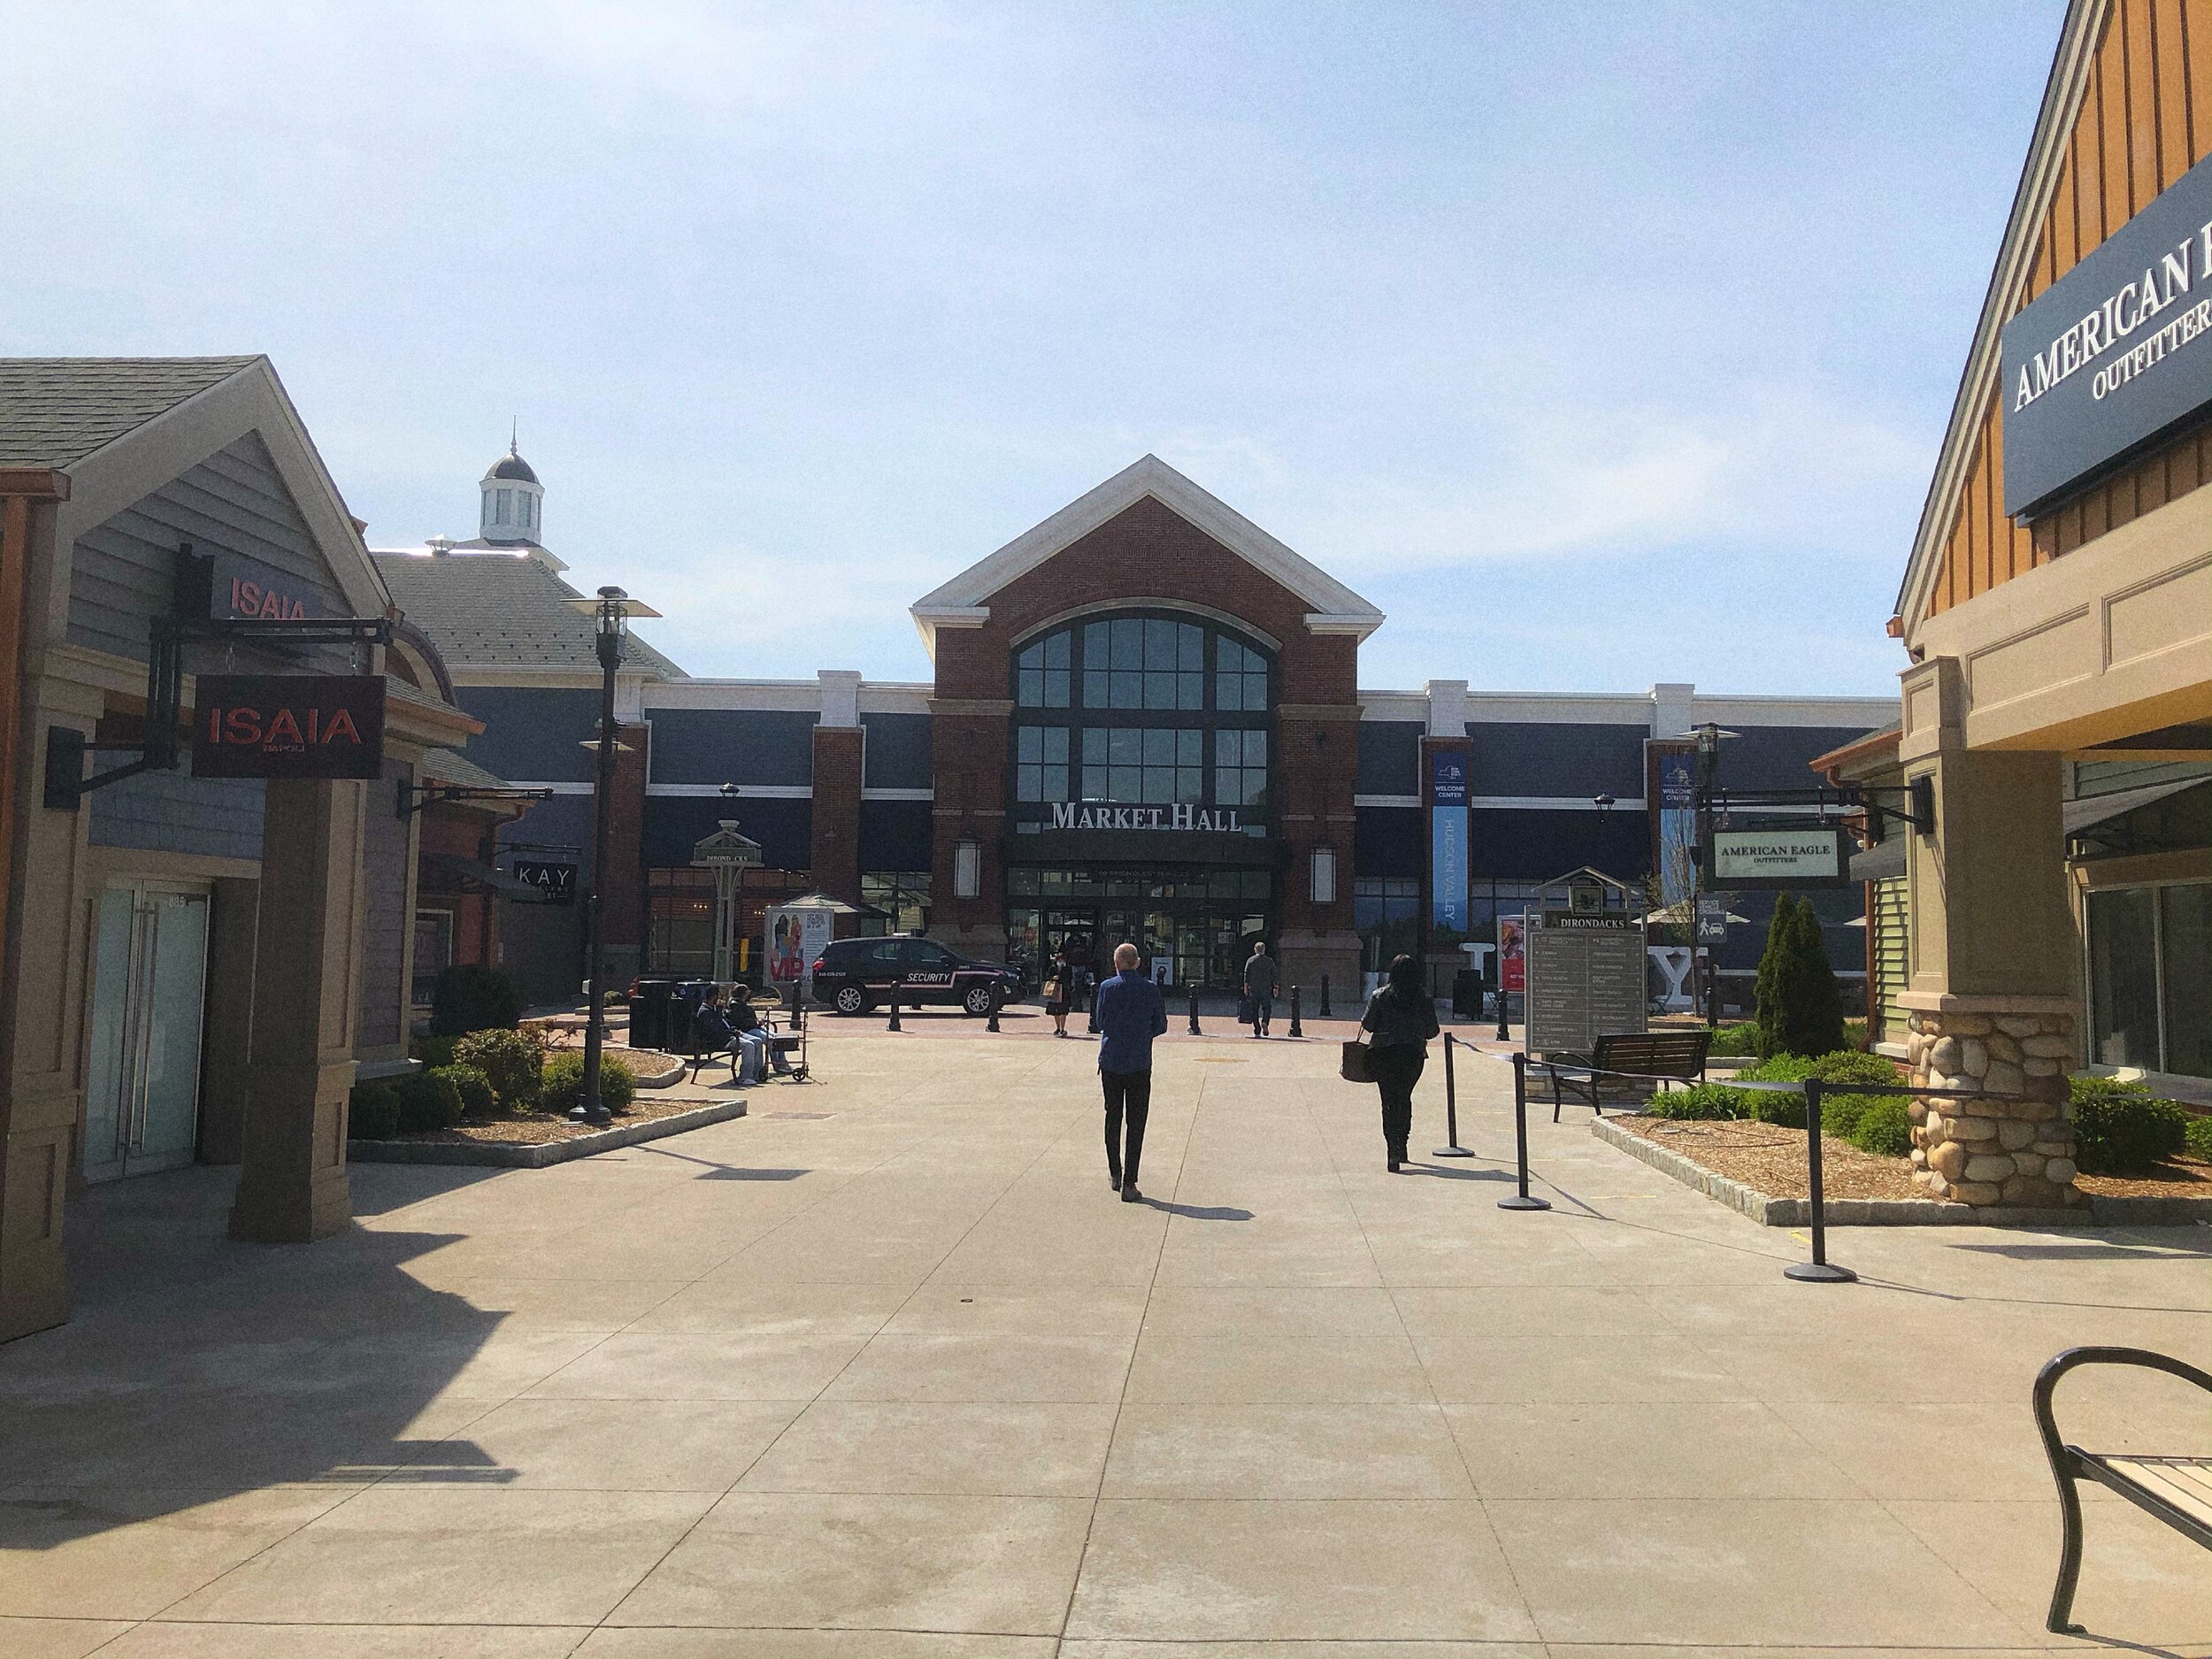 The Best 153 Restaurants Near Woodbury Common Premium Outlets